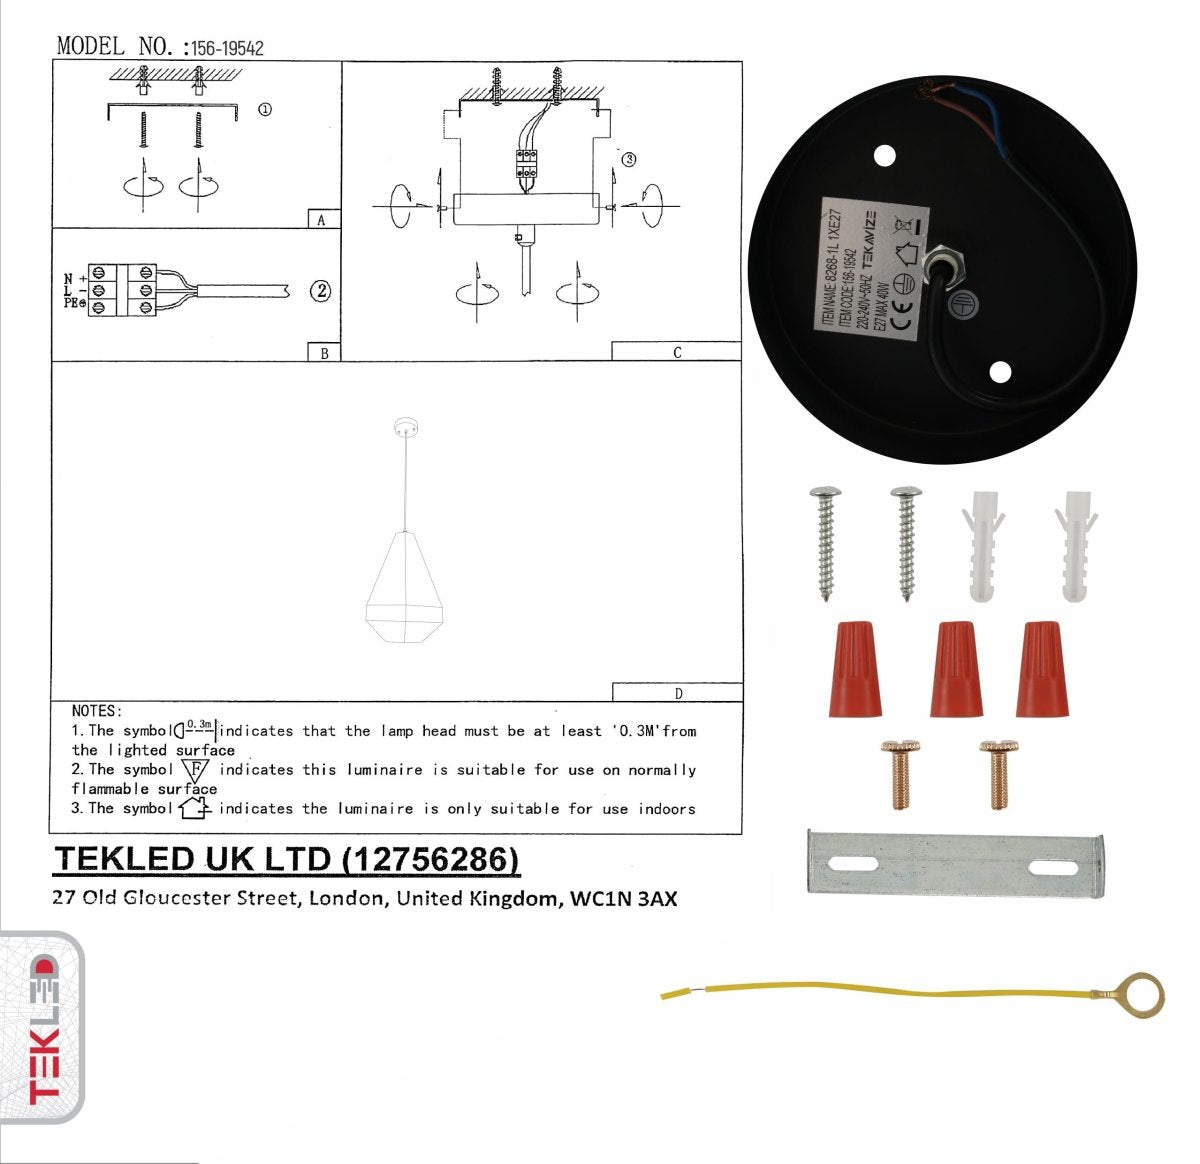 User manual for Golden Metal Polyhedral Pendant Light L with E27 Fitting | TEKLED 156-19542